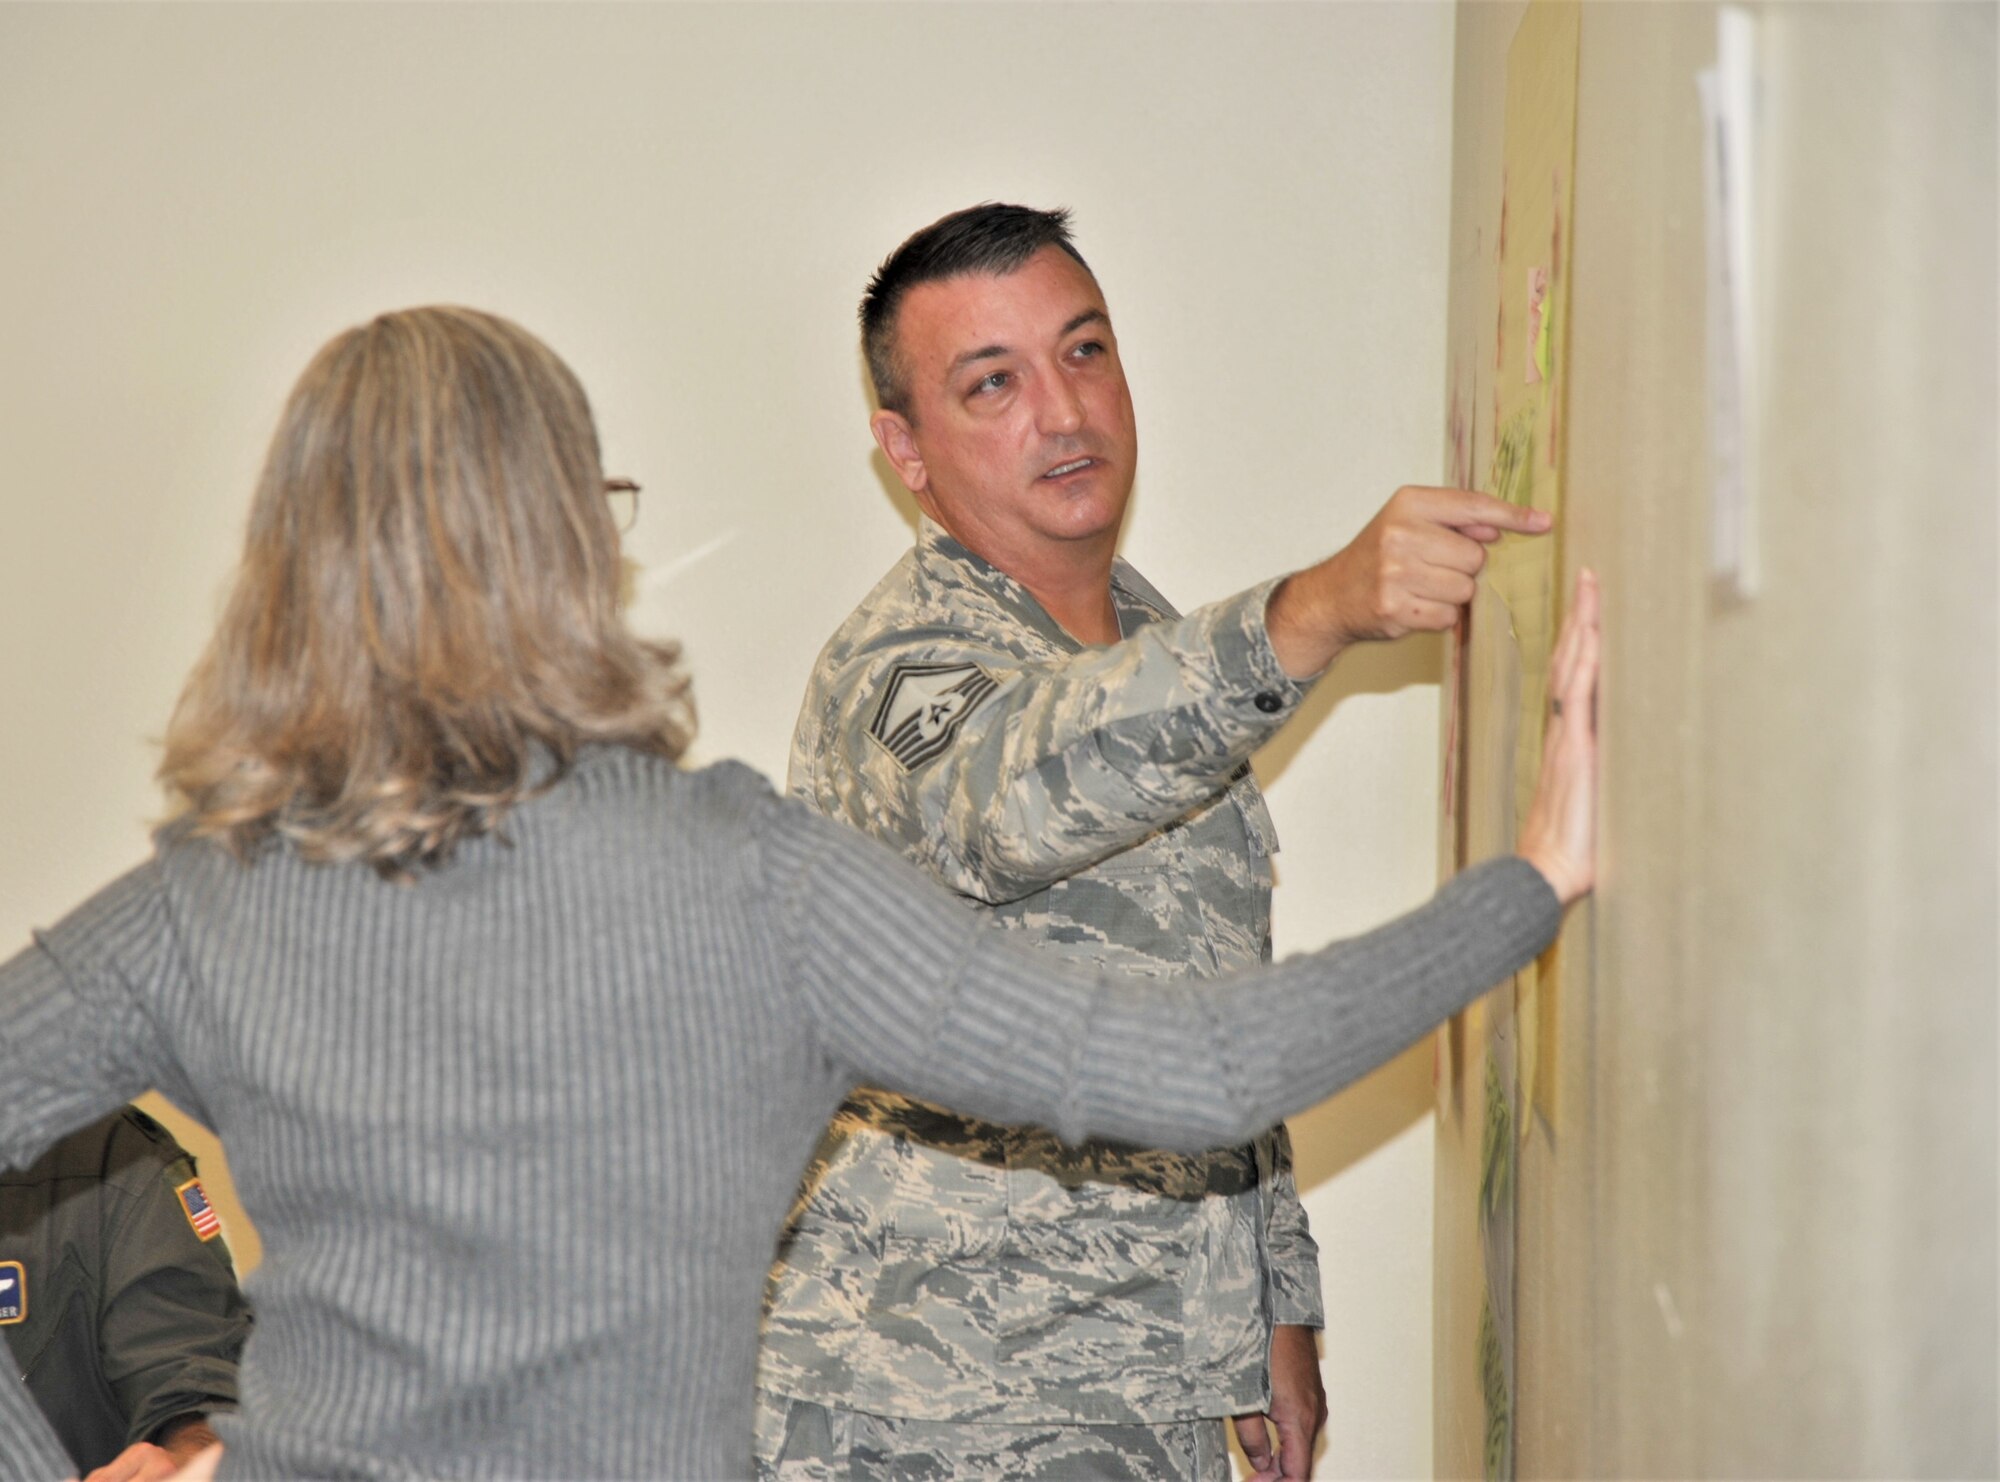 Senior Master Sgt. Jon Rousseaux, 340th Flying Training Group aviation resource management superintendent, discusses Reserve pay processing issues with Teresa Davies, 340th FTG continuous process improvement manager, during the Nov. 19-21 CPI event held at Joint Base San Antonio-Randolph, Texas, to find solutions for issues that occur when Reservist transition between pay statuses while Lt. Col. Brian Boettger, 96th Flying Training Squadron instructor pilot looks on. (U.S. Air Force photo by Debbie Gildea)